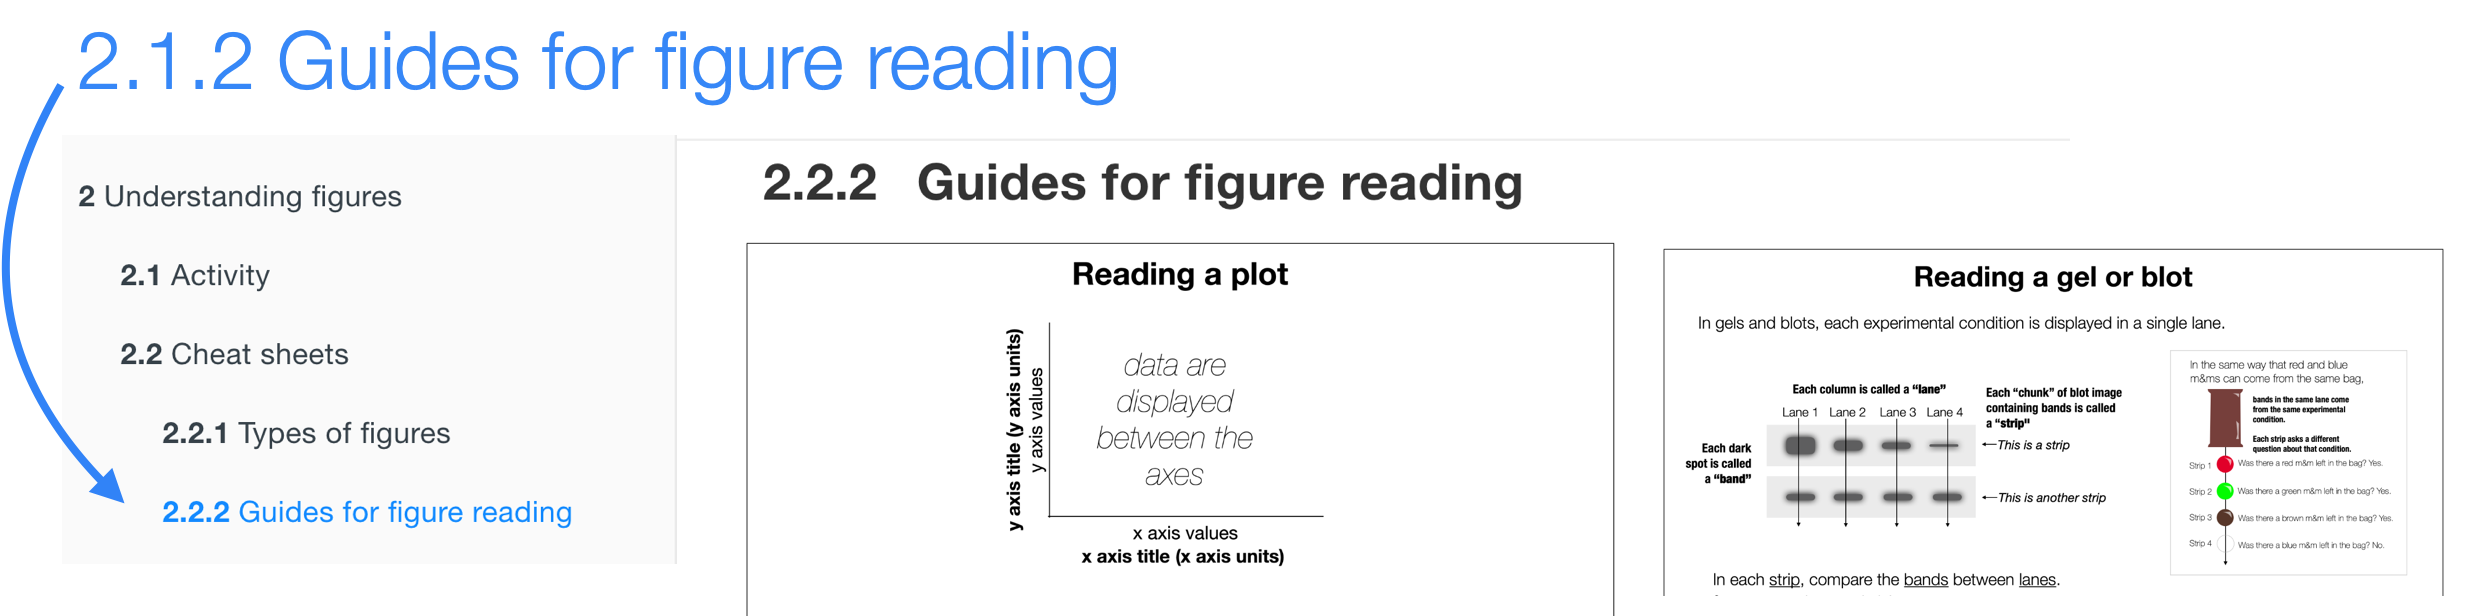 Screen shot of the "Guides for figure reading" cheat sheet tab